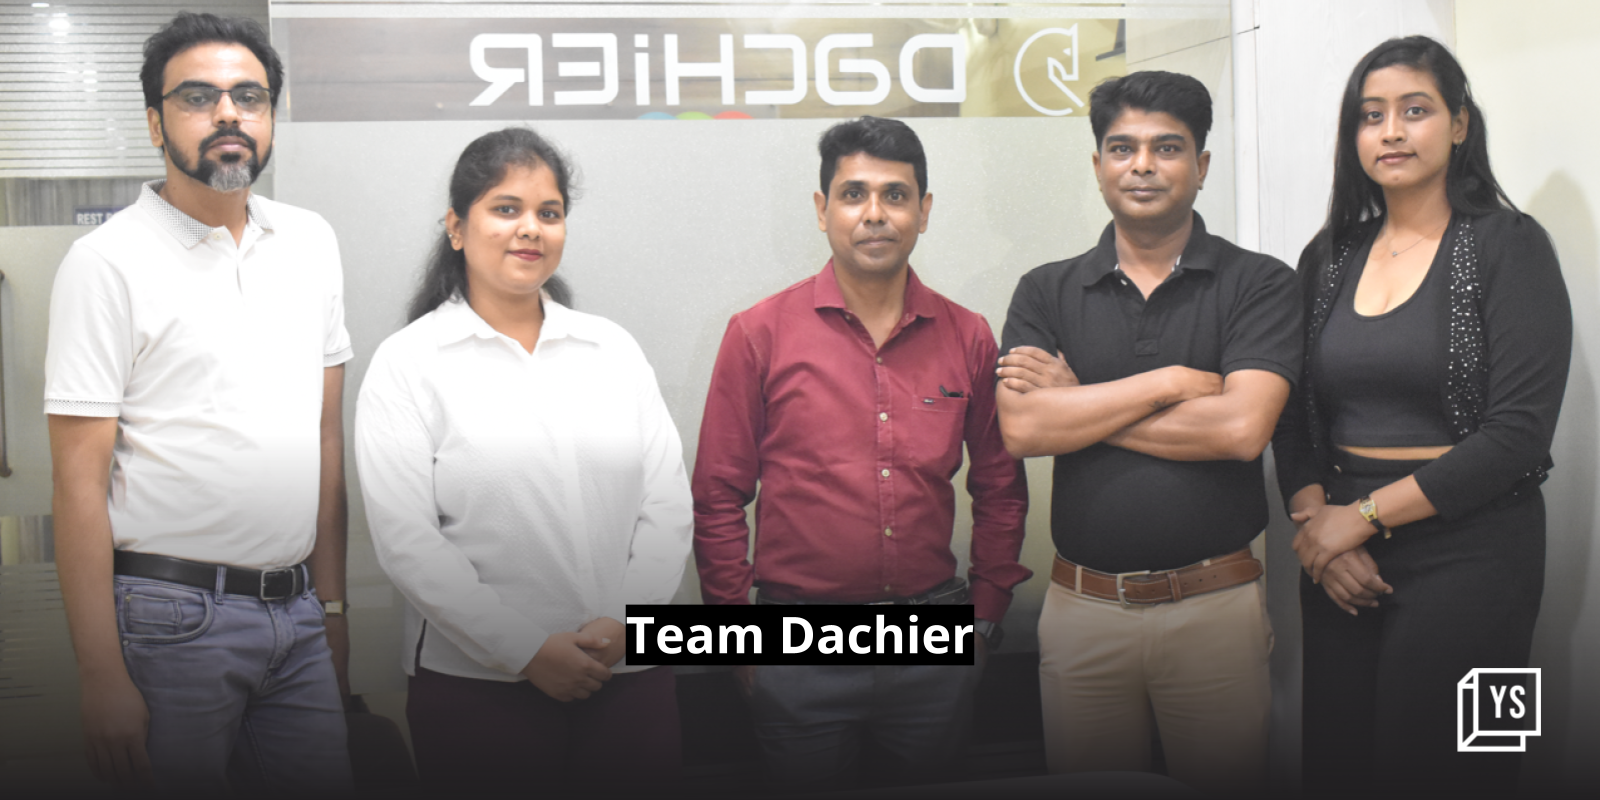 Bringing boutiques online: SaaS startup Dachier's one-stop solution for fashion stakeholders